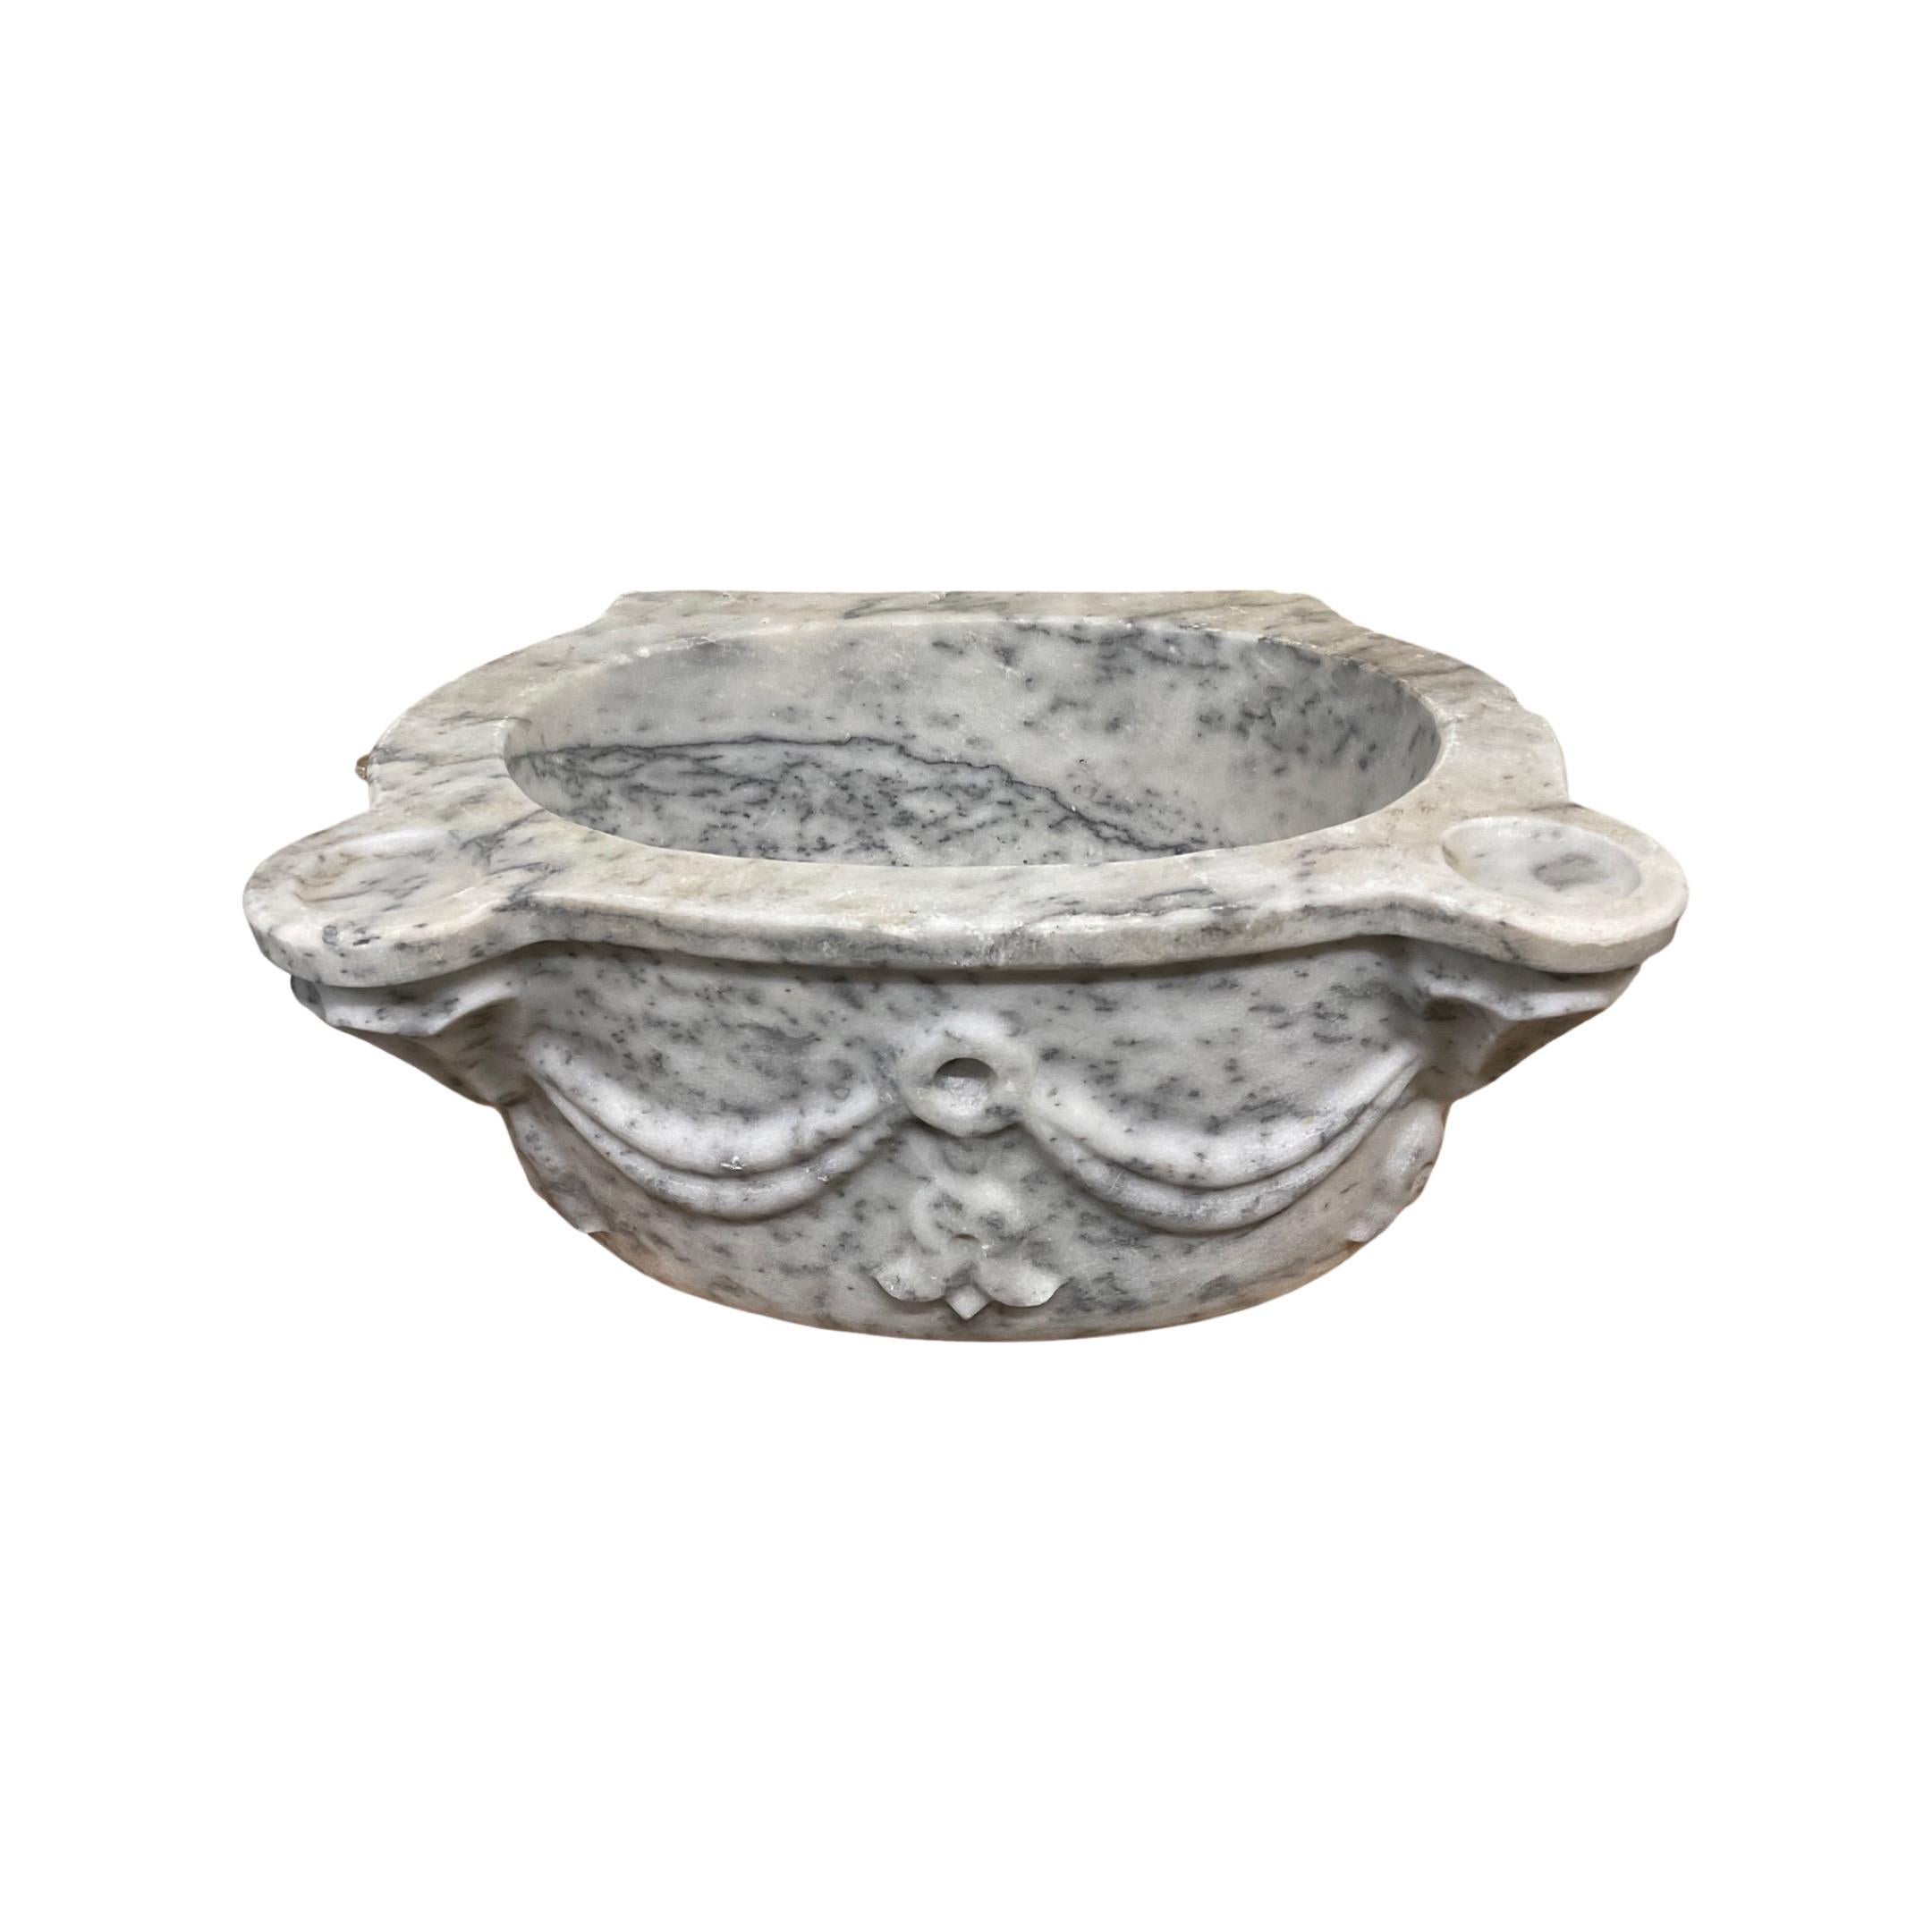 This exquisite French white marble sink is hand carved from the finest White Marble originating from France in the 18th century. Its timeless beauty and durability make it a centerpiece for any bathroom.